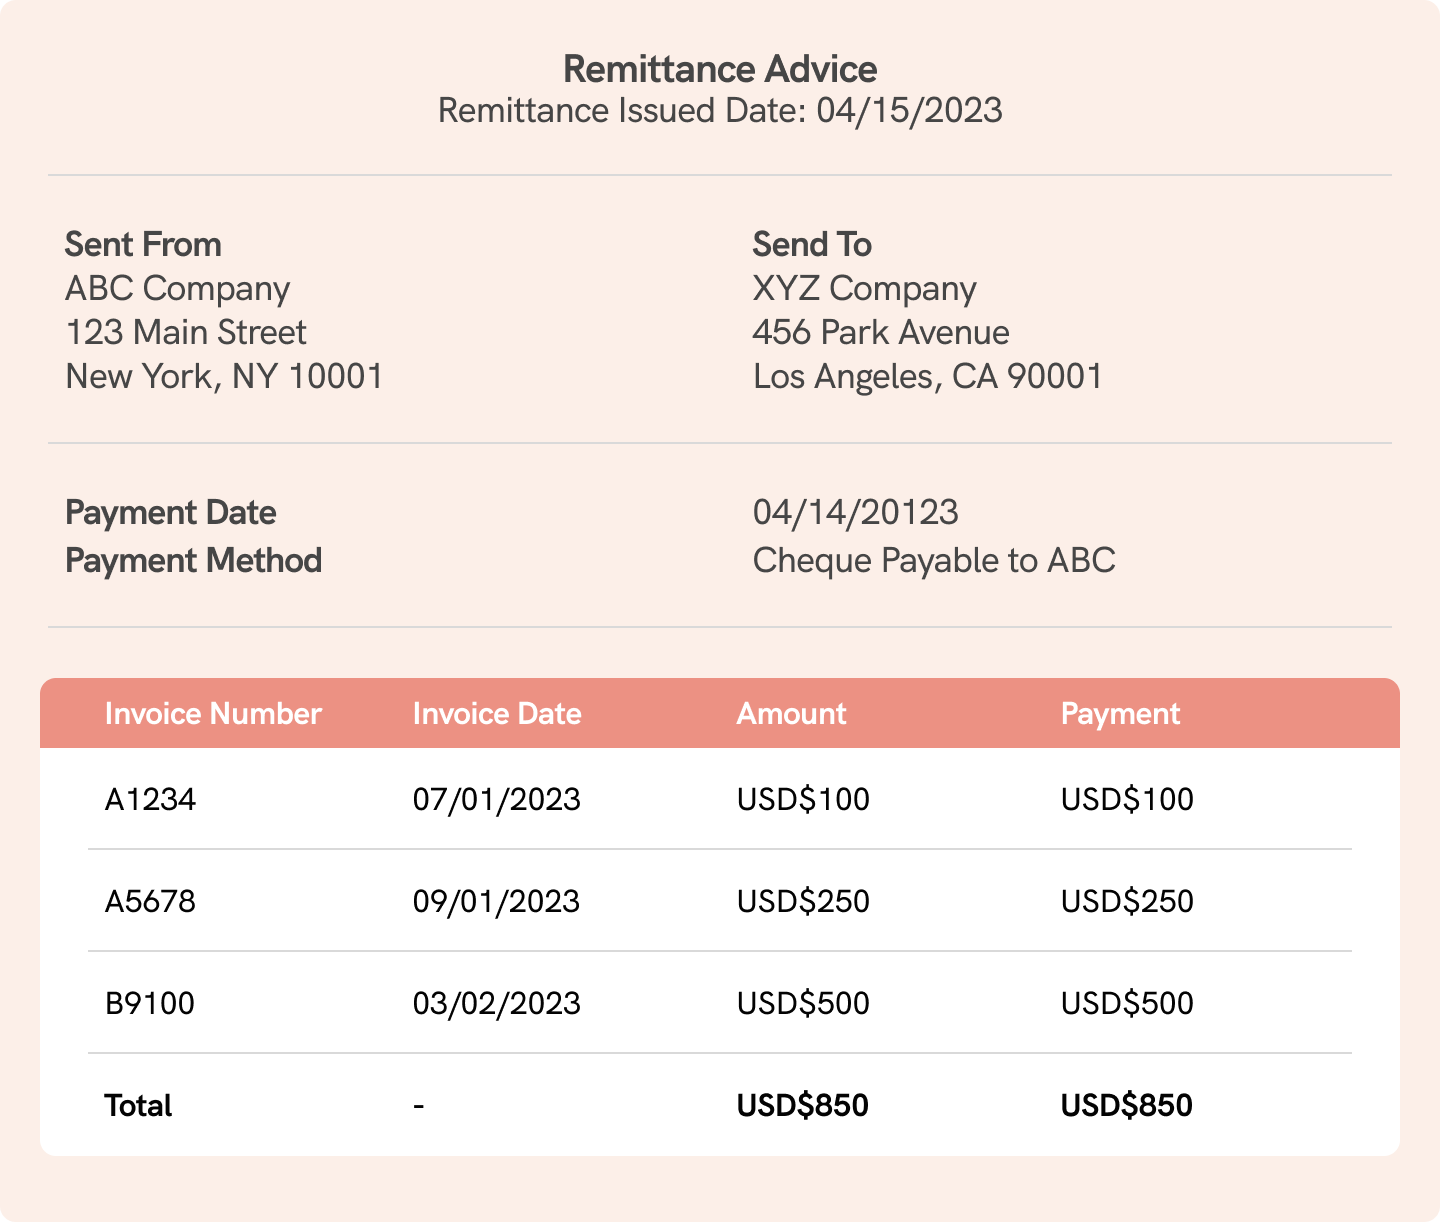 An example of a remittance advice in table form.